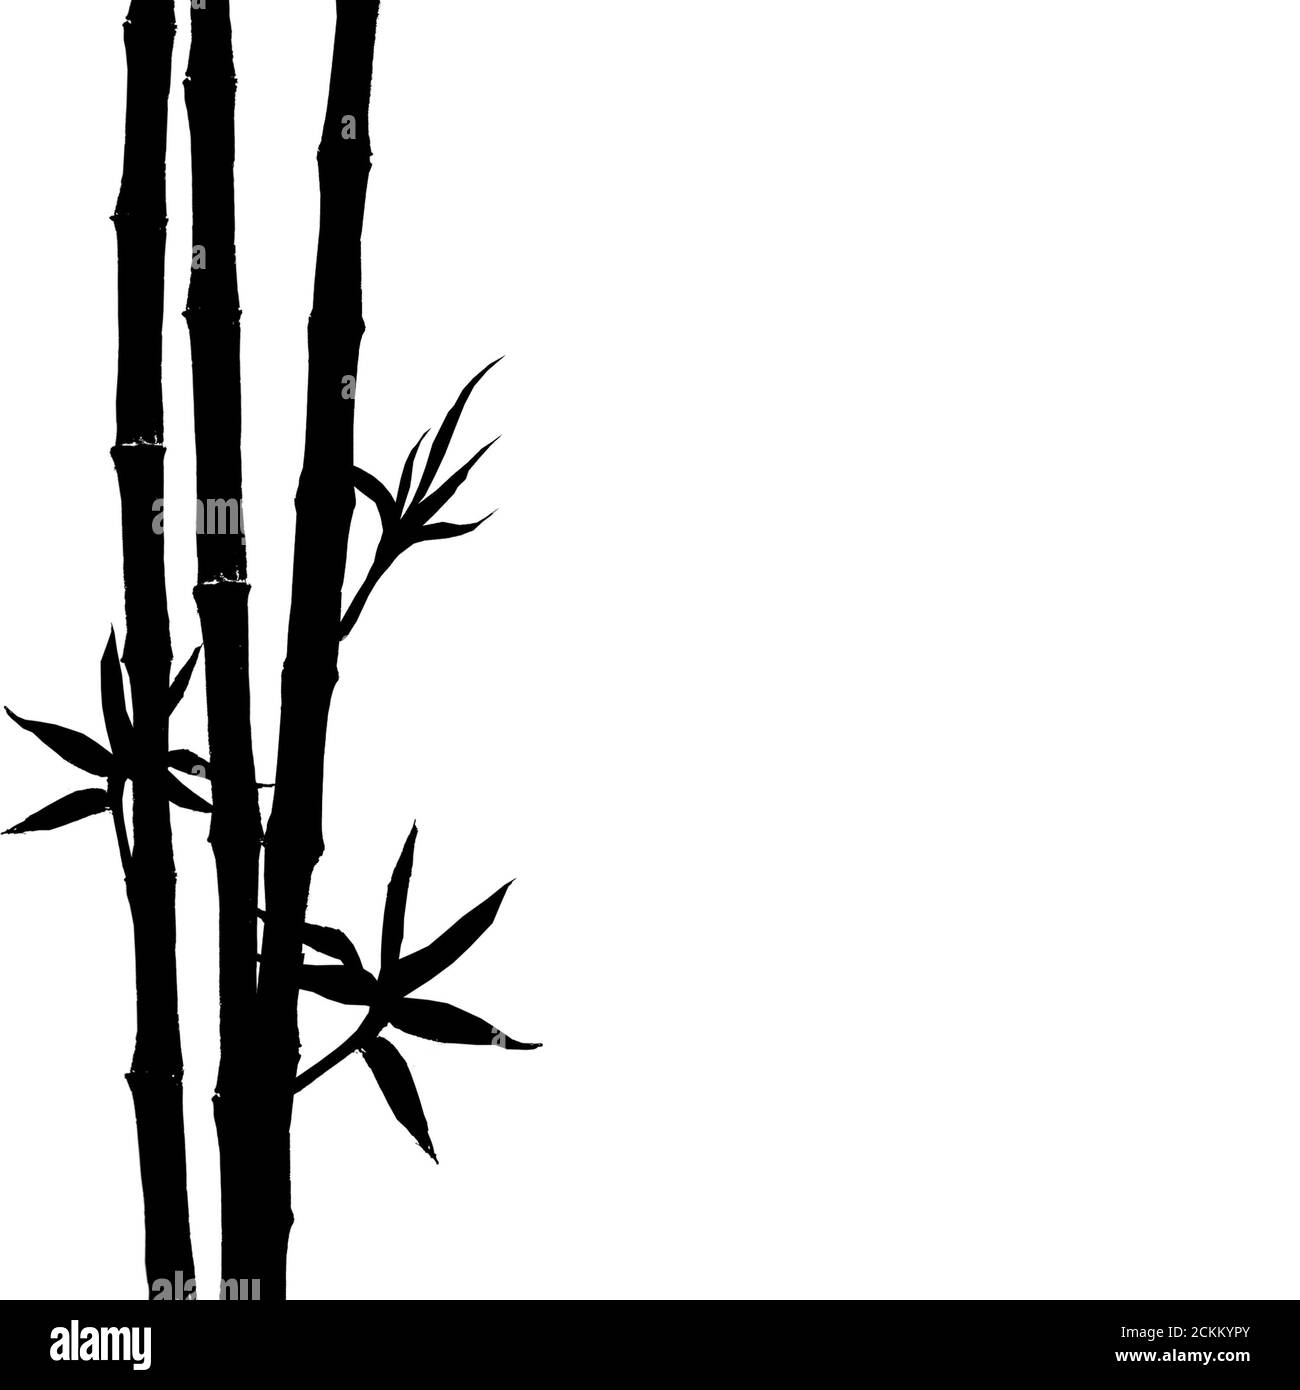 Black silhouette of bamboo stems and leaves isolated on white background. Hand drawn botanical illustration with space for text. Stock Photo